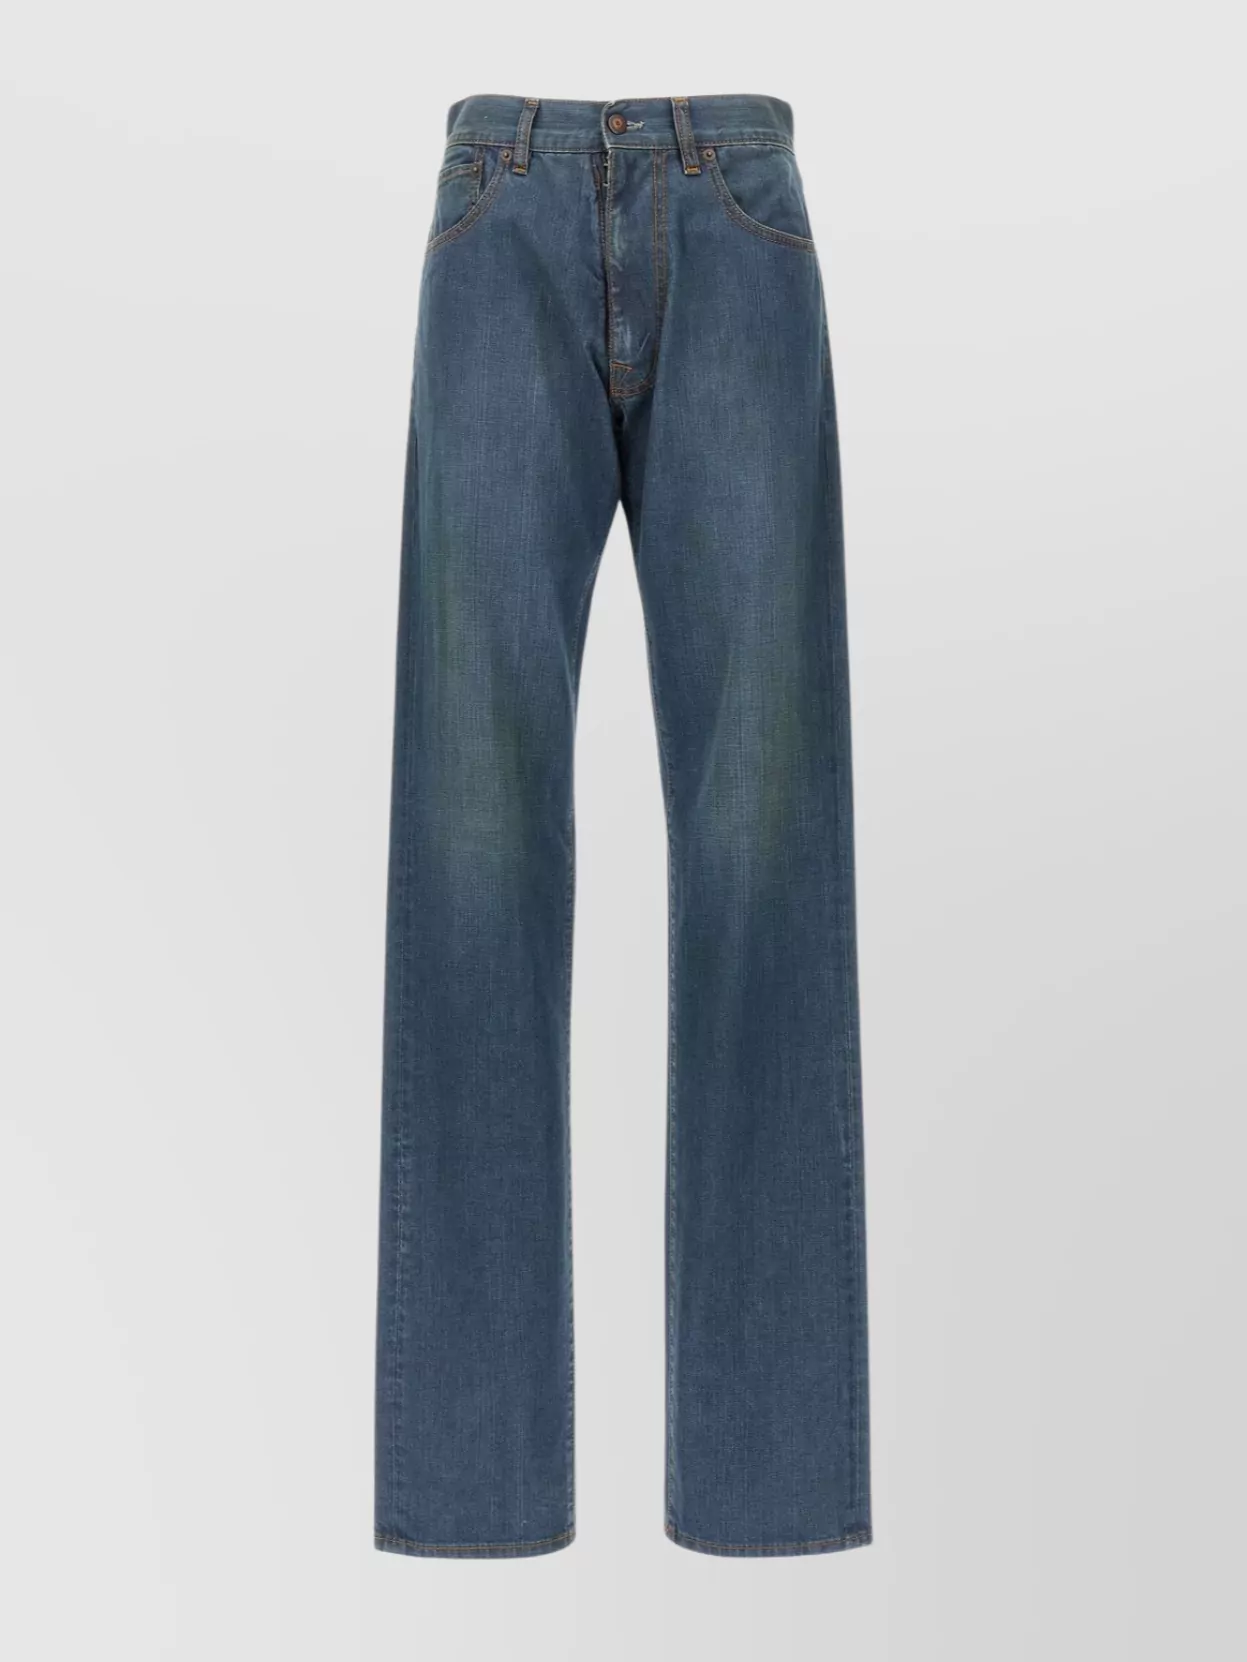 Maison Margiela Relaxed Fit Denim Trousers In Blue